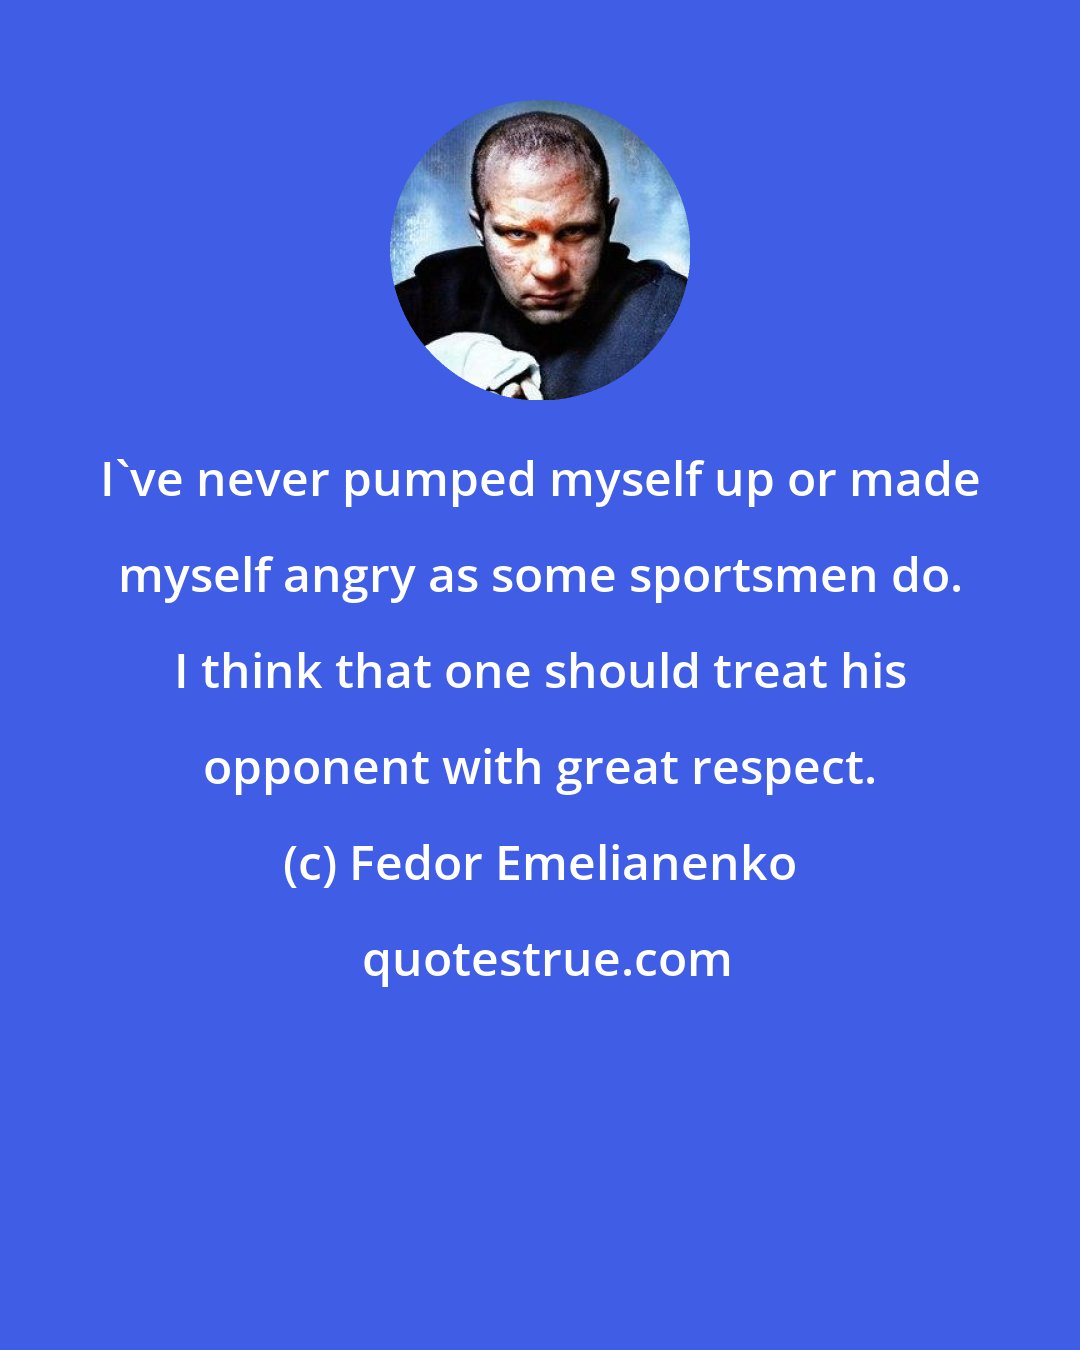 Fedor Emelianenko: I've never pumped myself up or made myself angry as some sportsmen do. I think that one should treat his opponent with great respect.